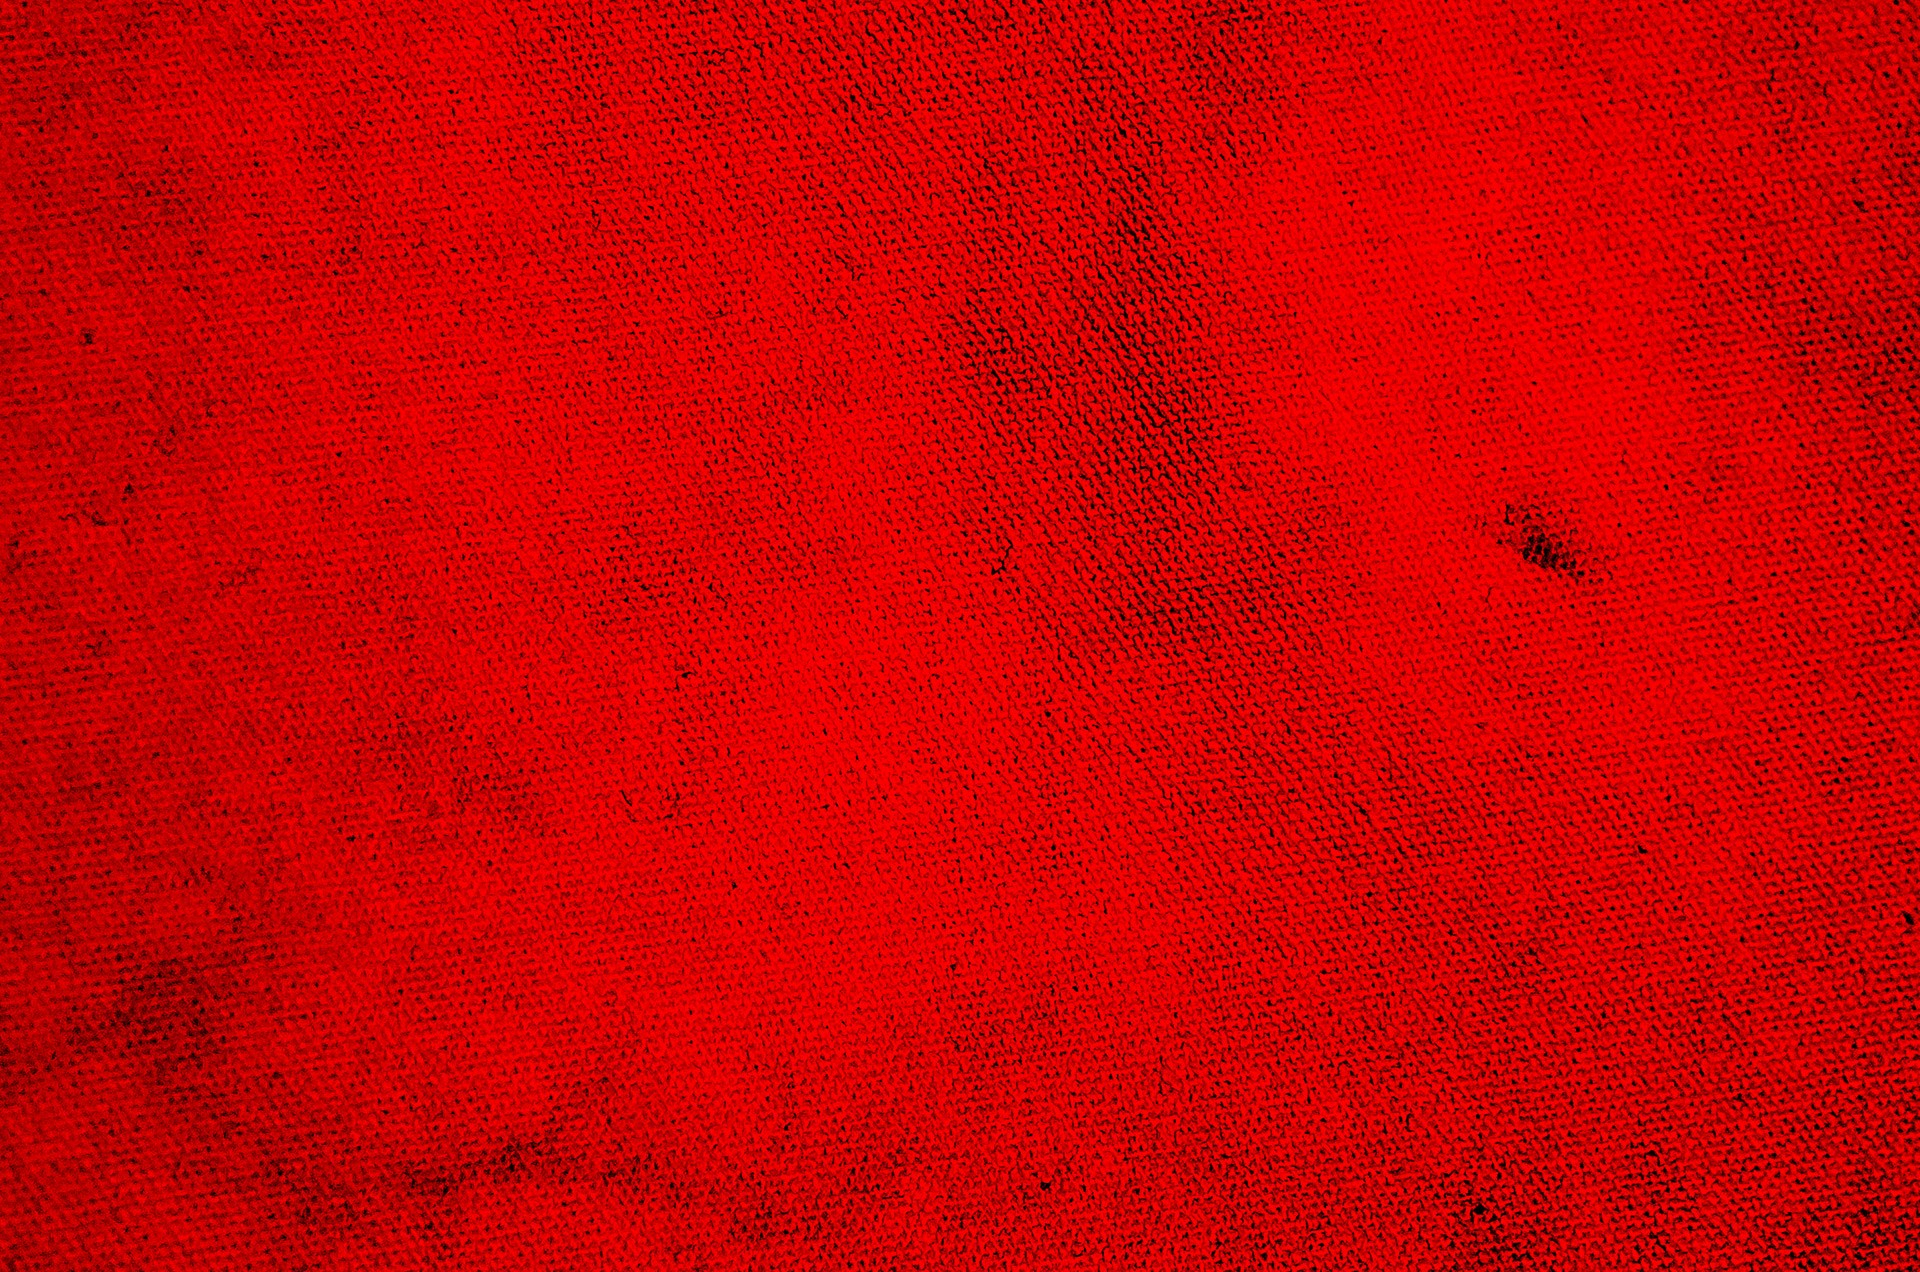 1920x1272 Red Grunge Backgrounds, Free Red Grungy Background SlideBackground